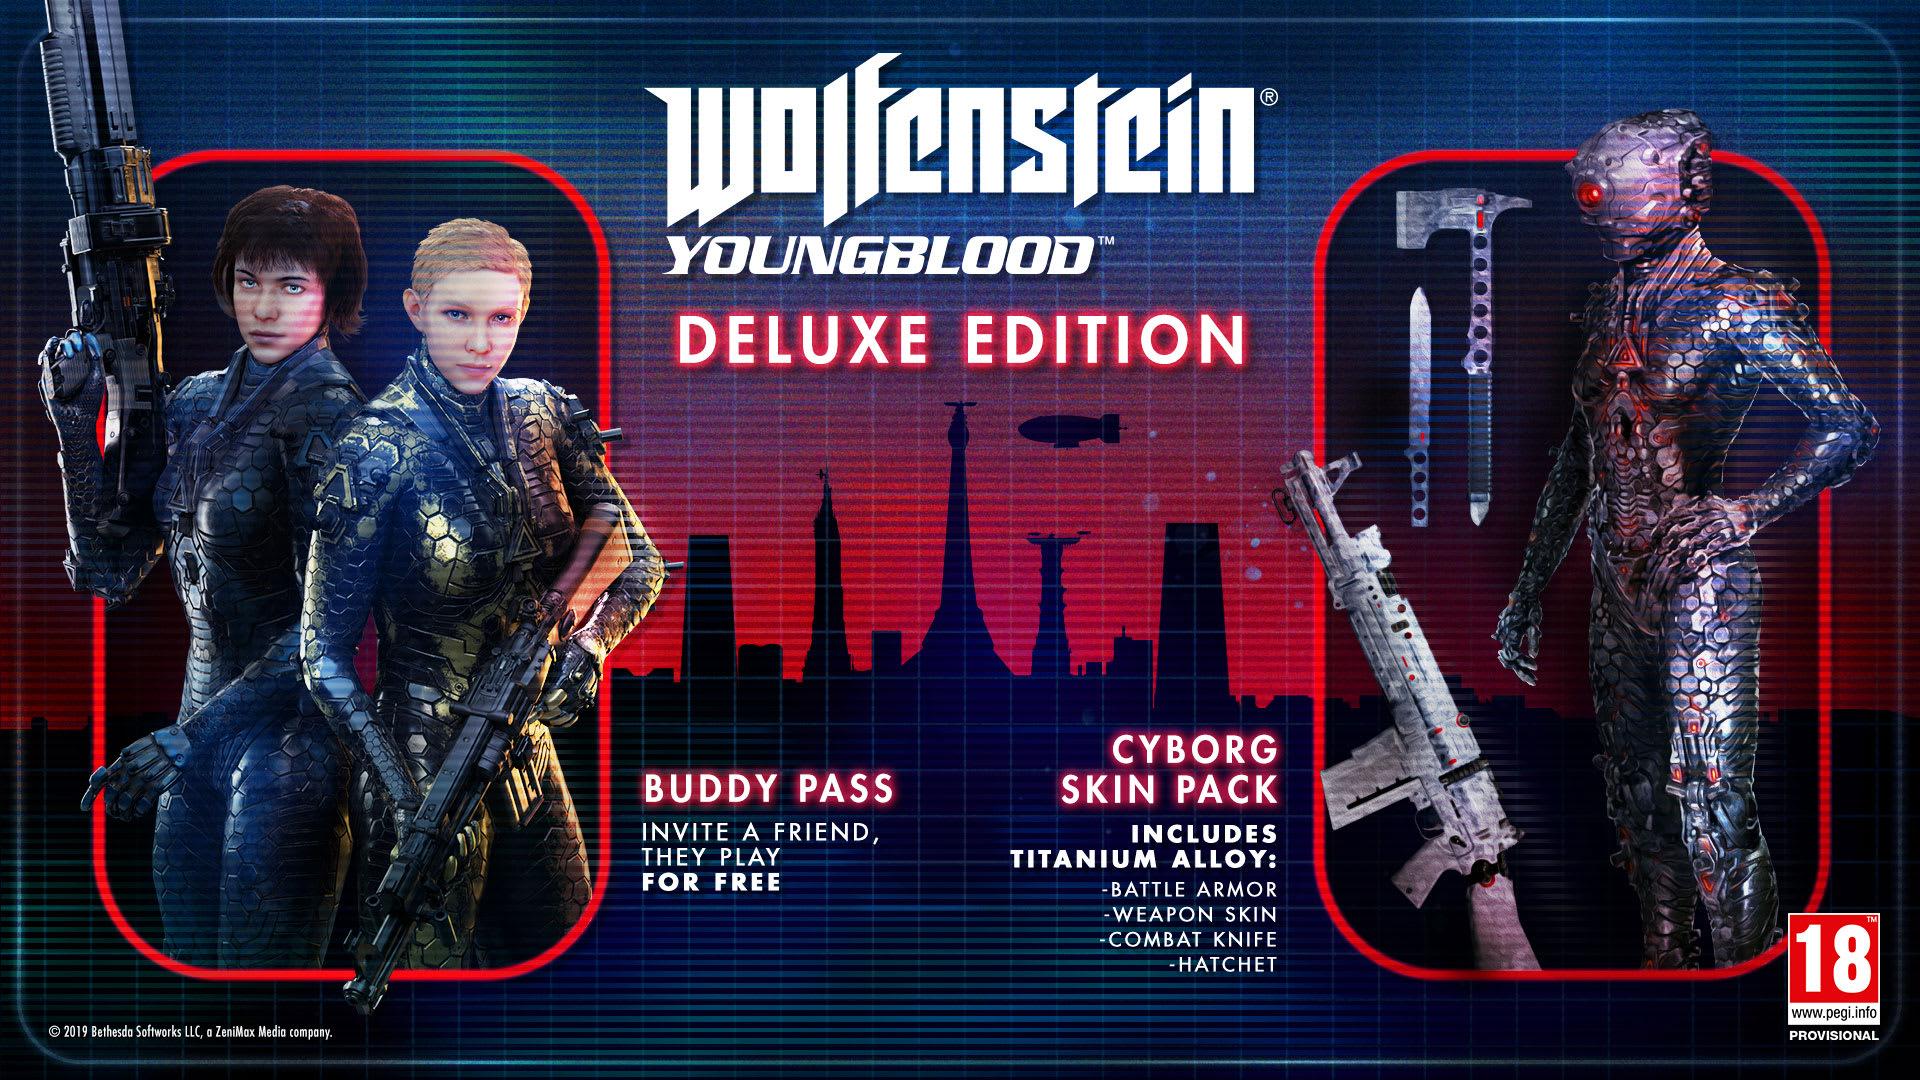 Buy Wolfenstein Youngblood Deluxe Edition With GAME Exclusive